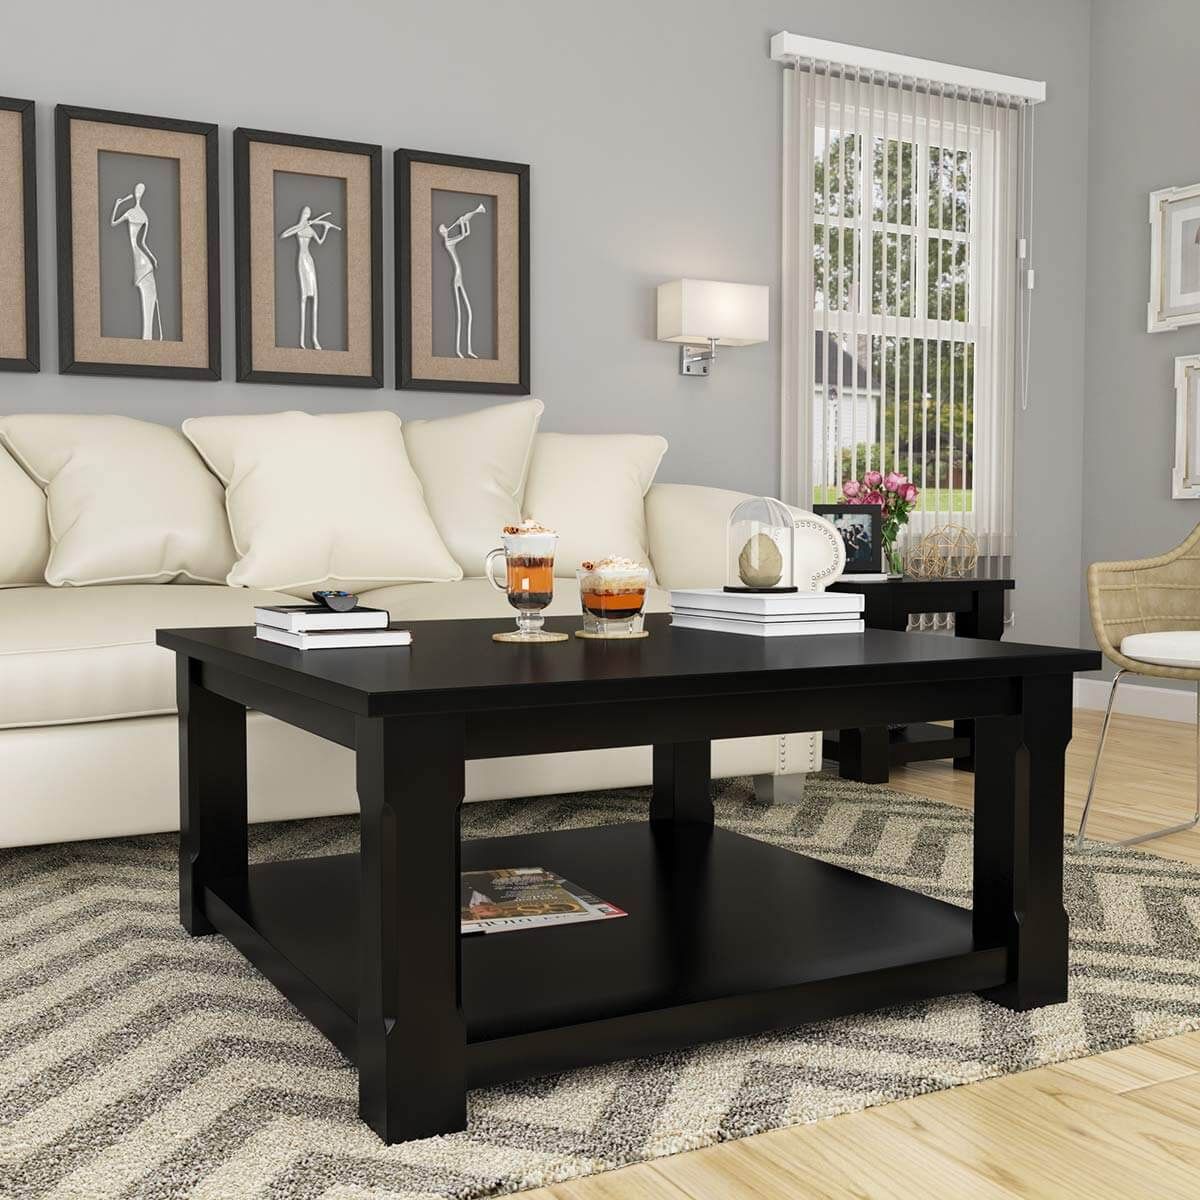 Black Wood Square Coffee Table – Brimson Contemporary Style Solid Wood Throughout Wood Coffee Tables With 2 Tier Storage (View 8 of 15)